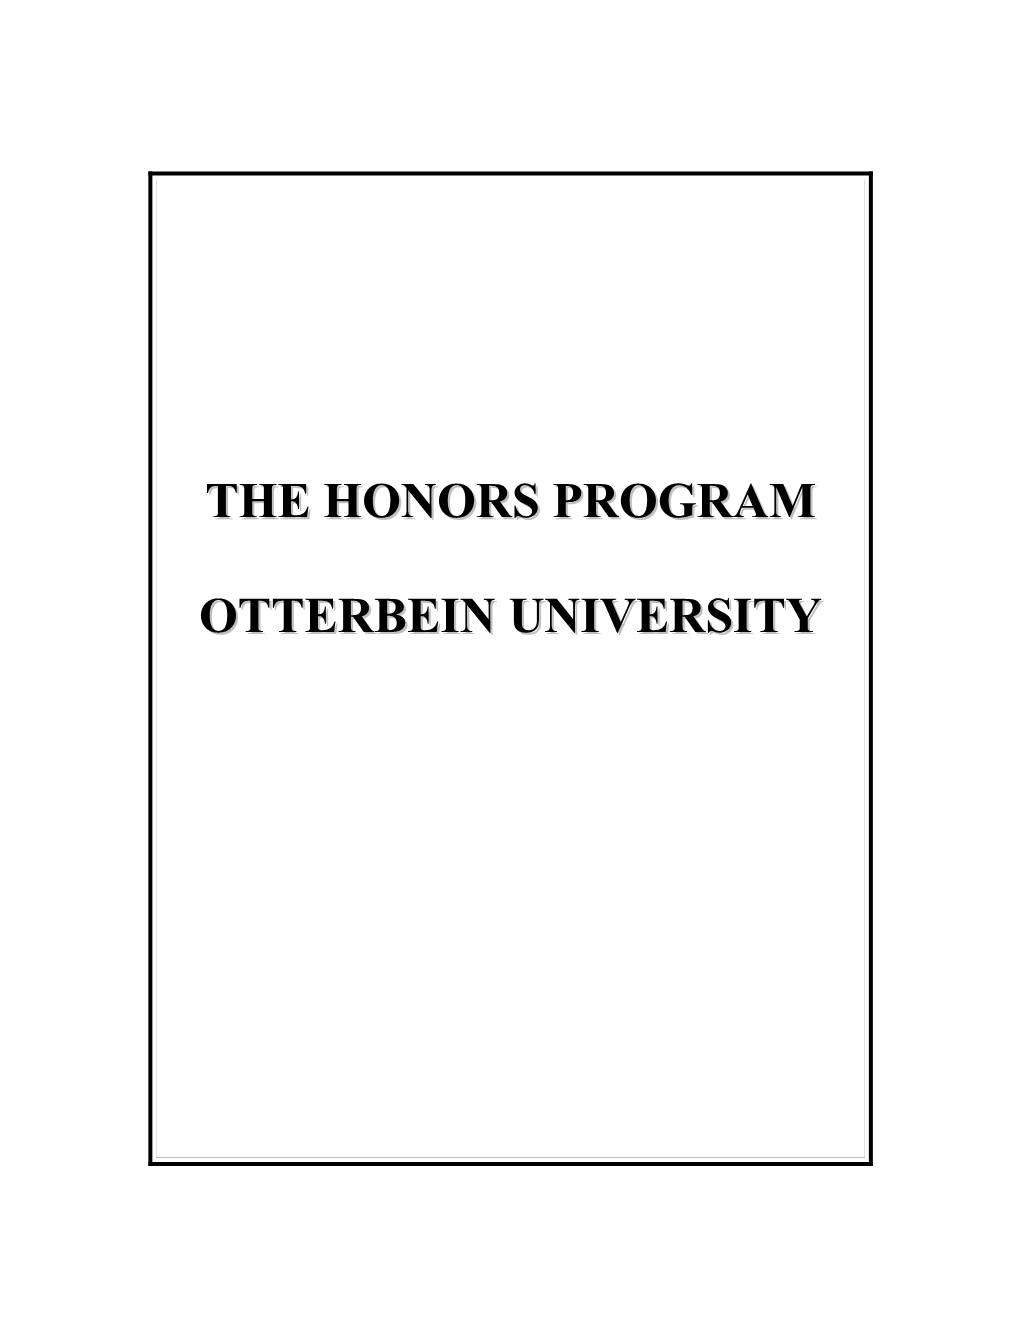 I. Introduction to the Honors Program